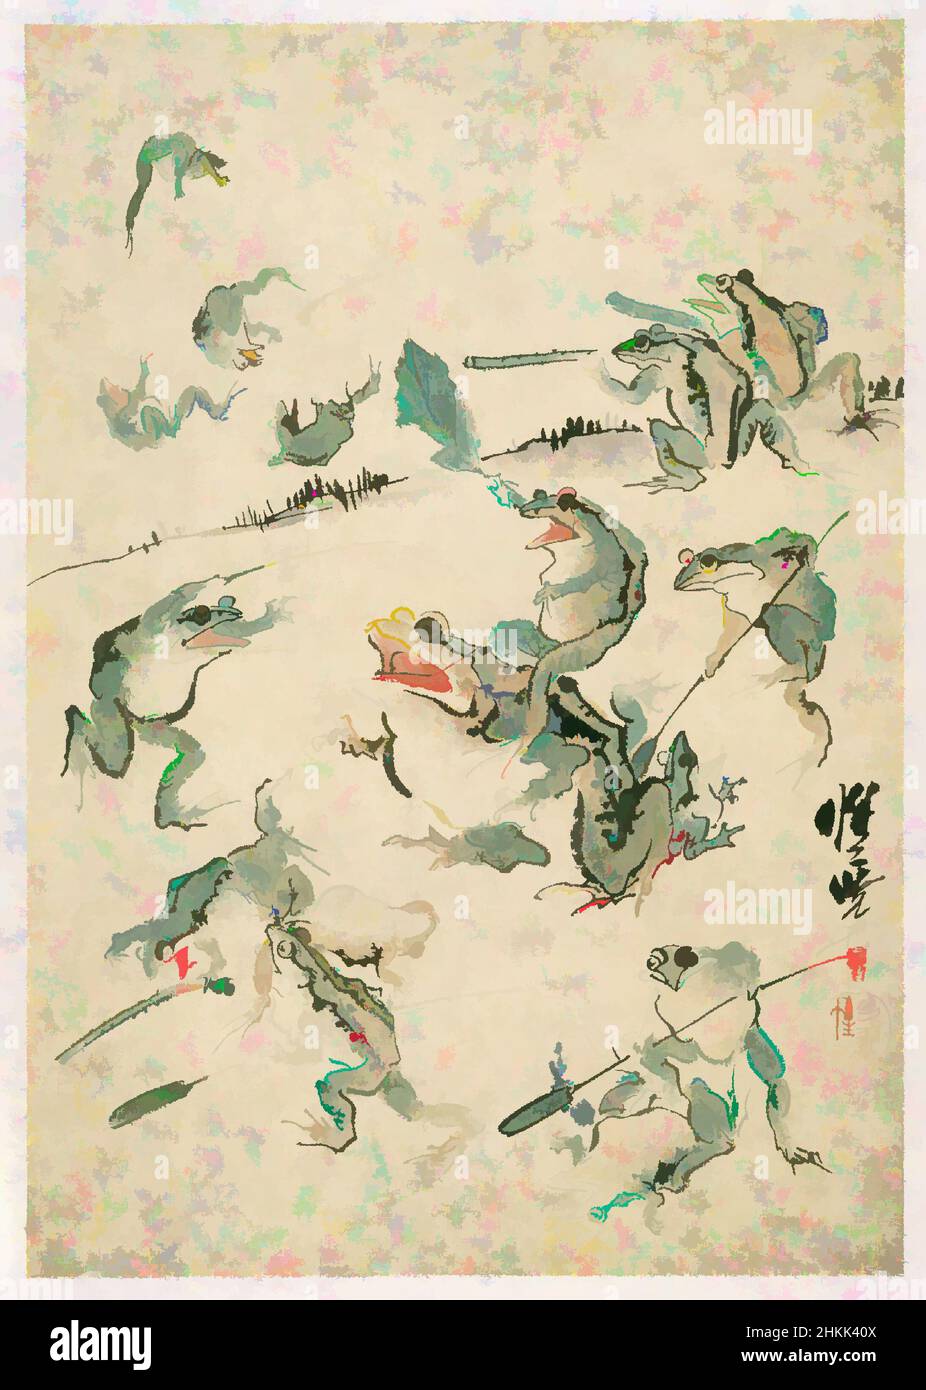 Art inspired by Sketch, Kawanabe Kyosai, Japanese, 1831-1889, Ink, paper, Japan, 19th century, Meiji Period, Sheet: 17 13/16 x 13 9/16 in., 45.2 x 34.5 cm, allegory, fable, frogs, Kawanabe Kyosai, symbolism, Classic works modernized by Artotop with a splash of modernity. Shapes, color and value, eye-catching visual impact on art. Emotions through freedom of artworks in a contemporary way. A timeless message pursuing a wildly creative new direction. Artists turning to the digital medium and creating the Artotop NFT Stock Photo